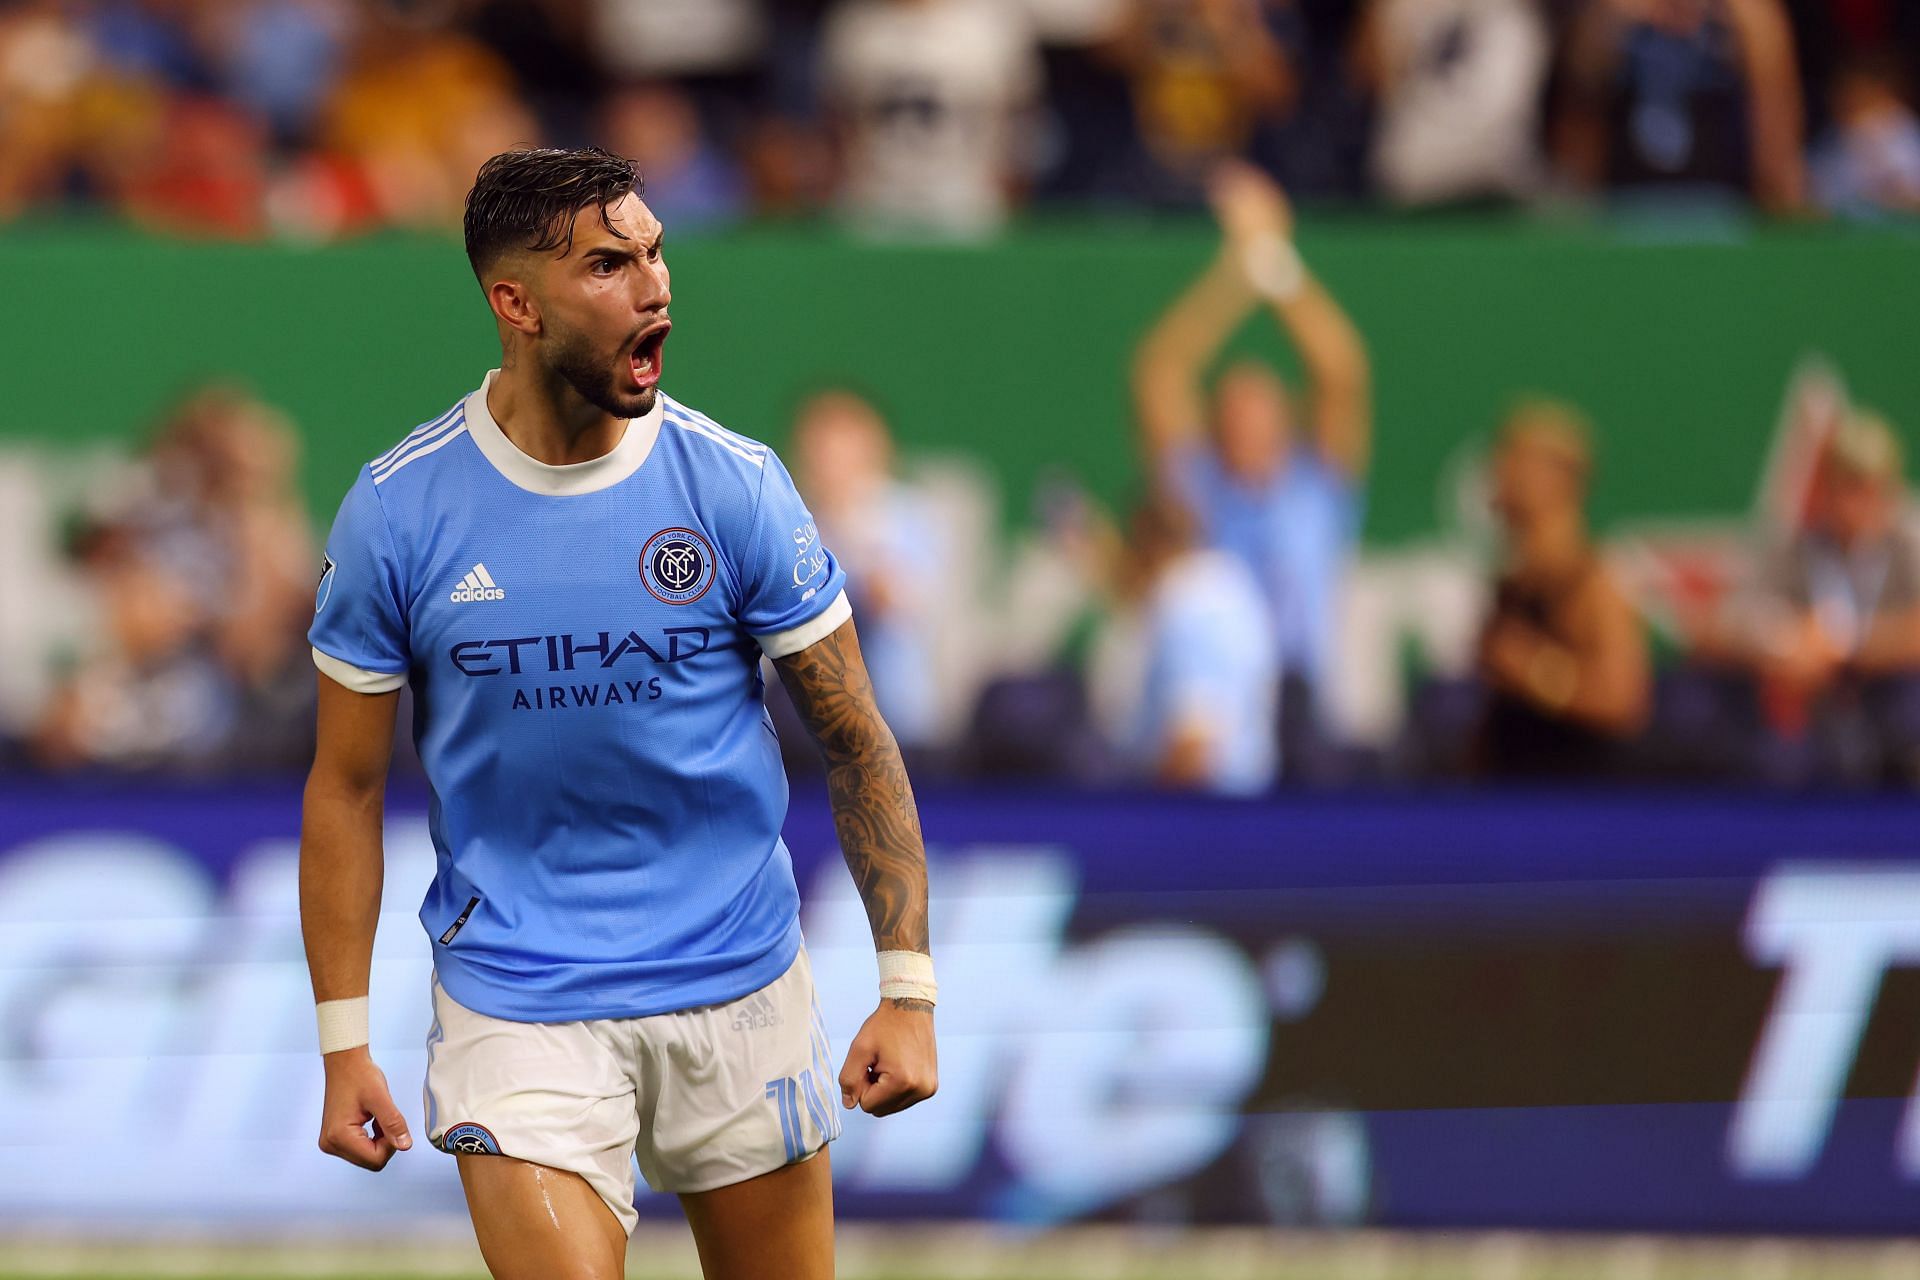 New York City FC play their second consecutive away game in the MLS on Saturday